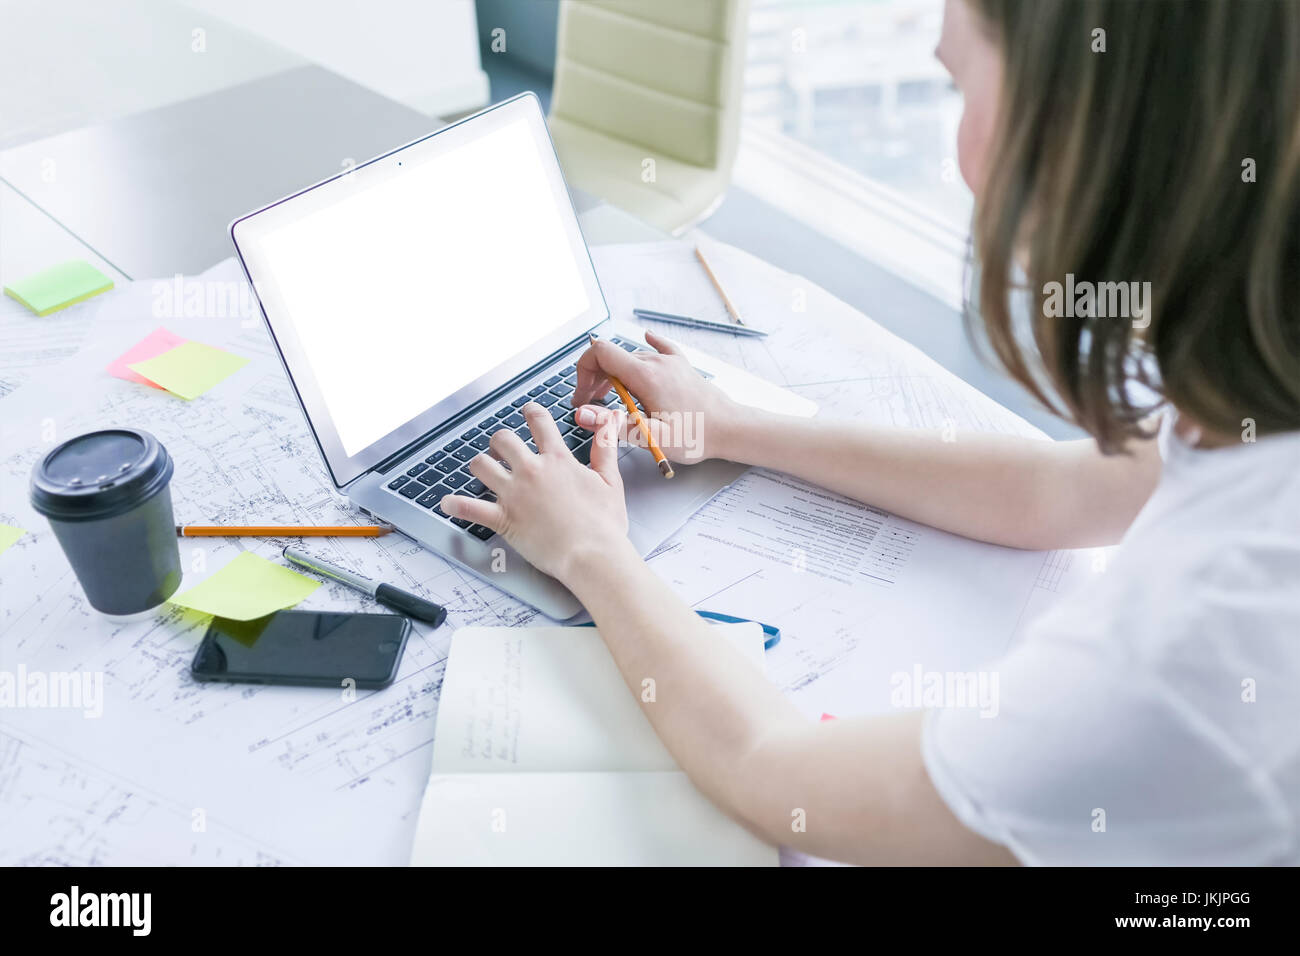 Woman working in the office Stock Photo